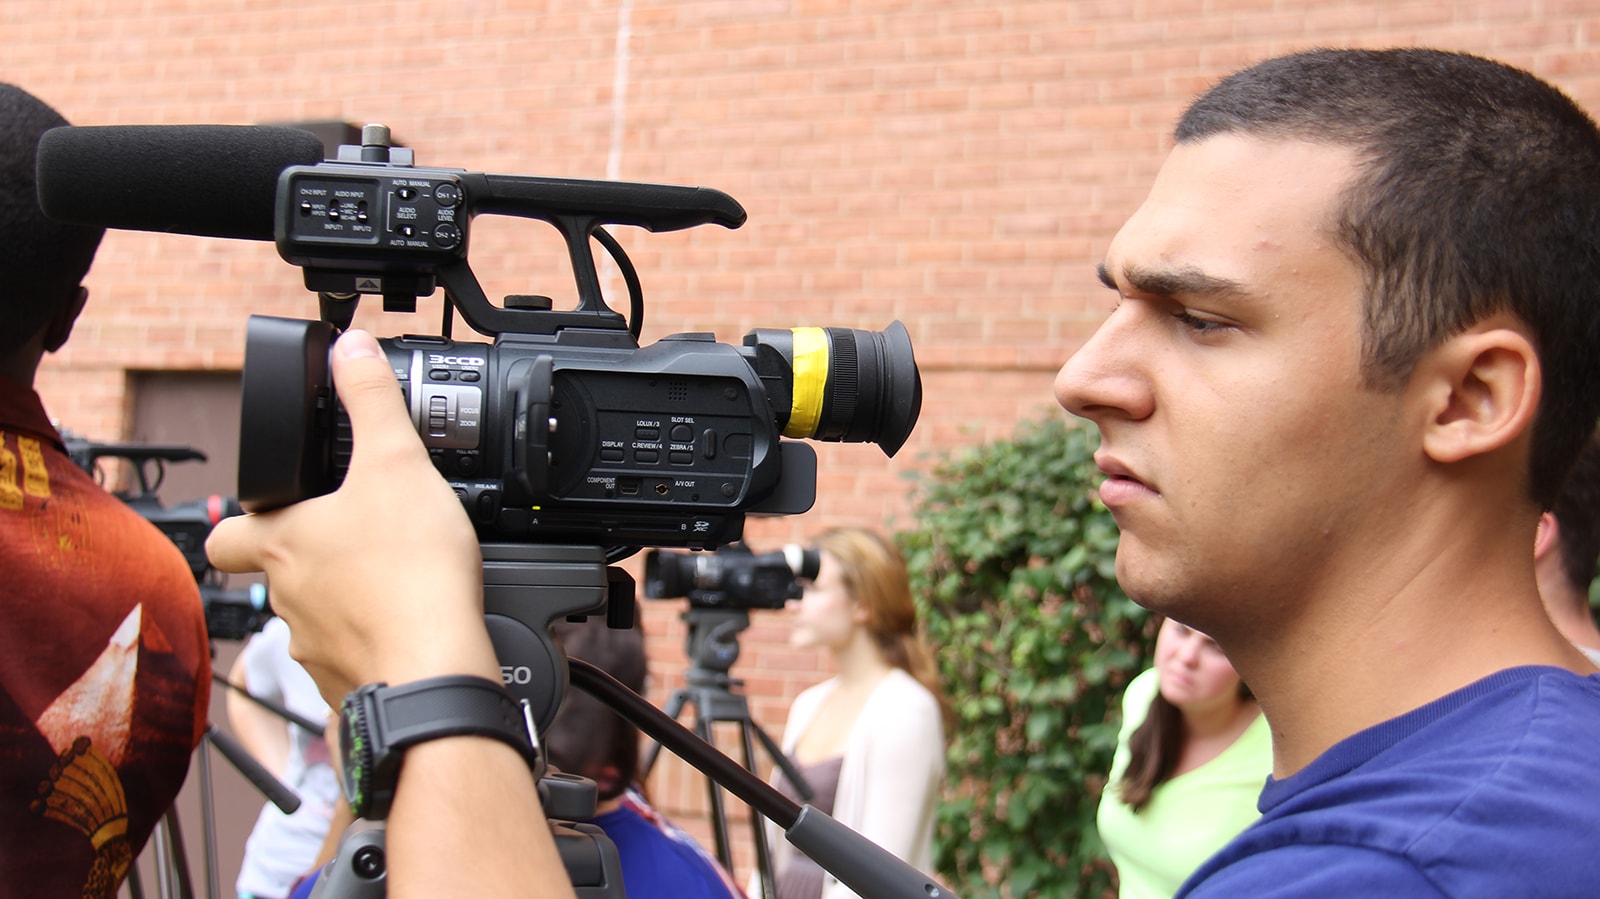 Close up shot of a student operating a video camera